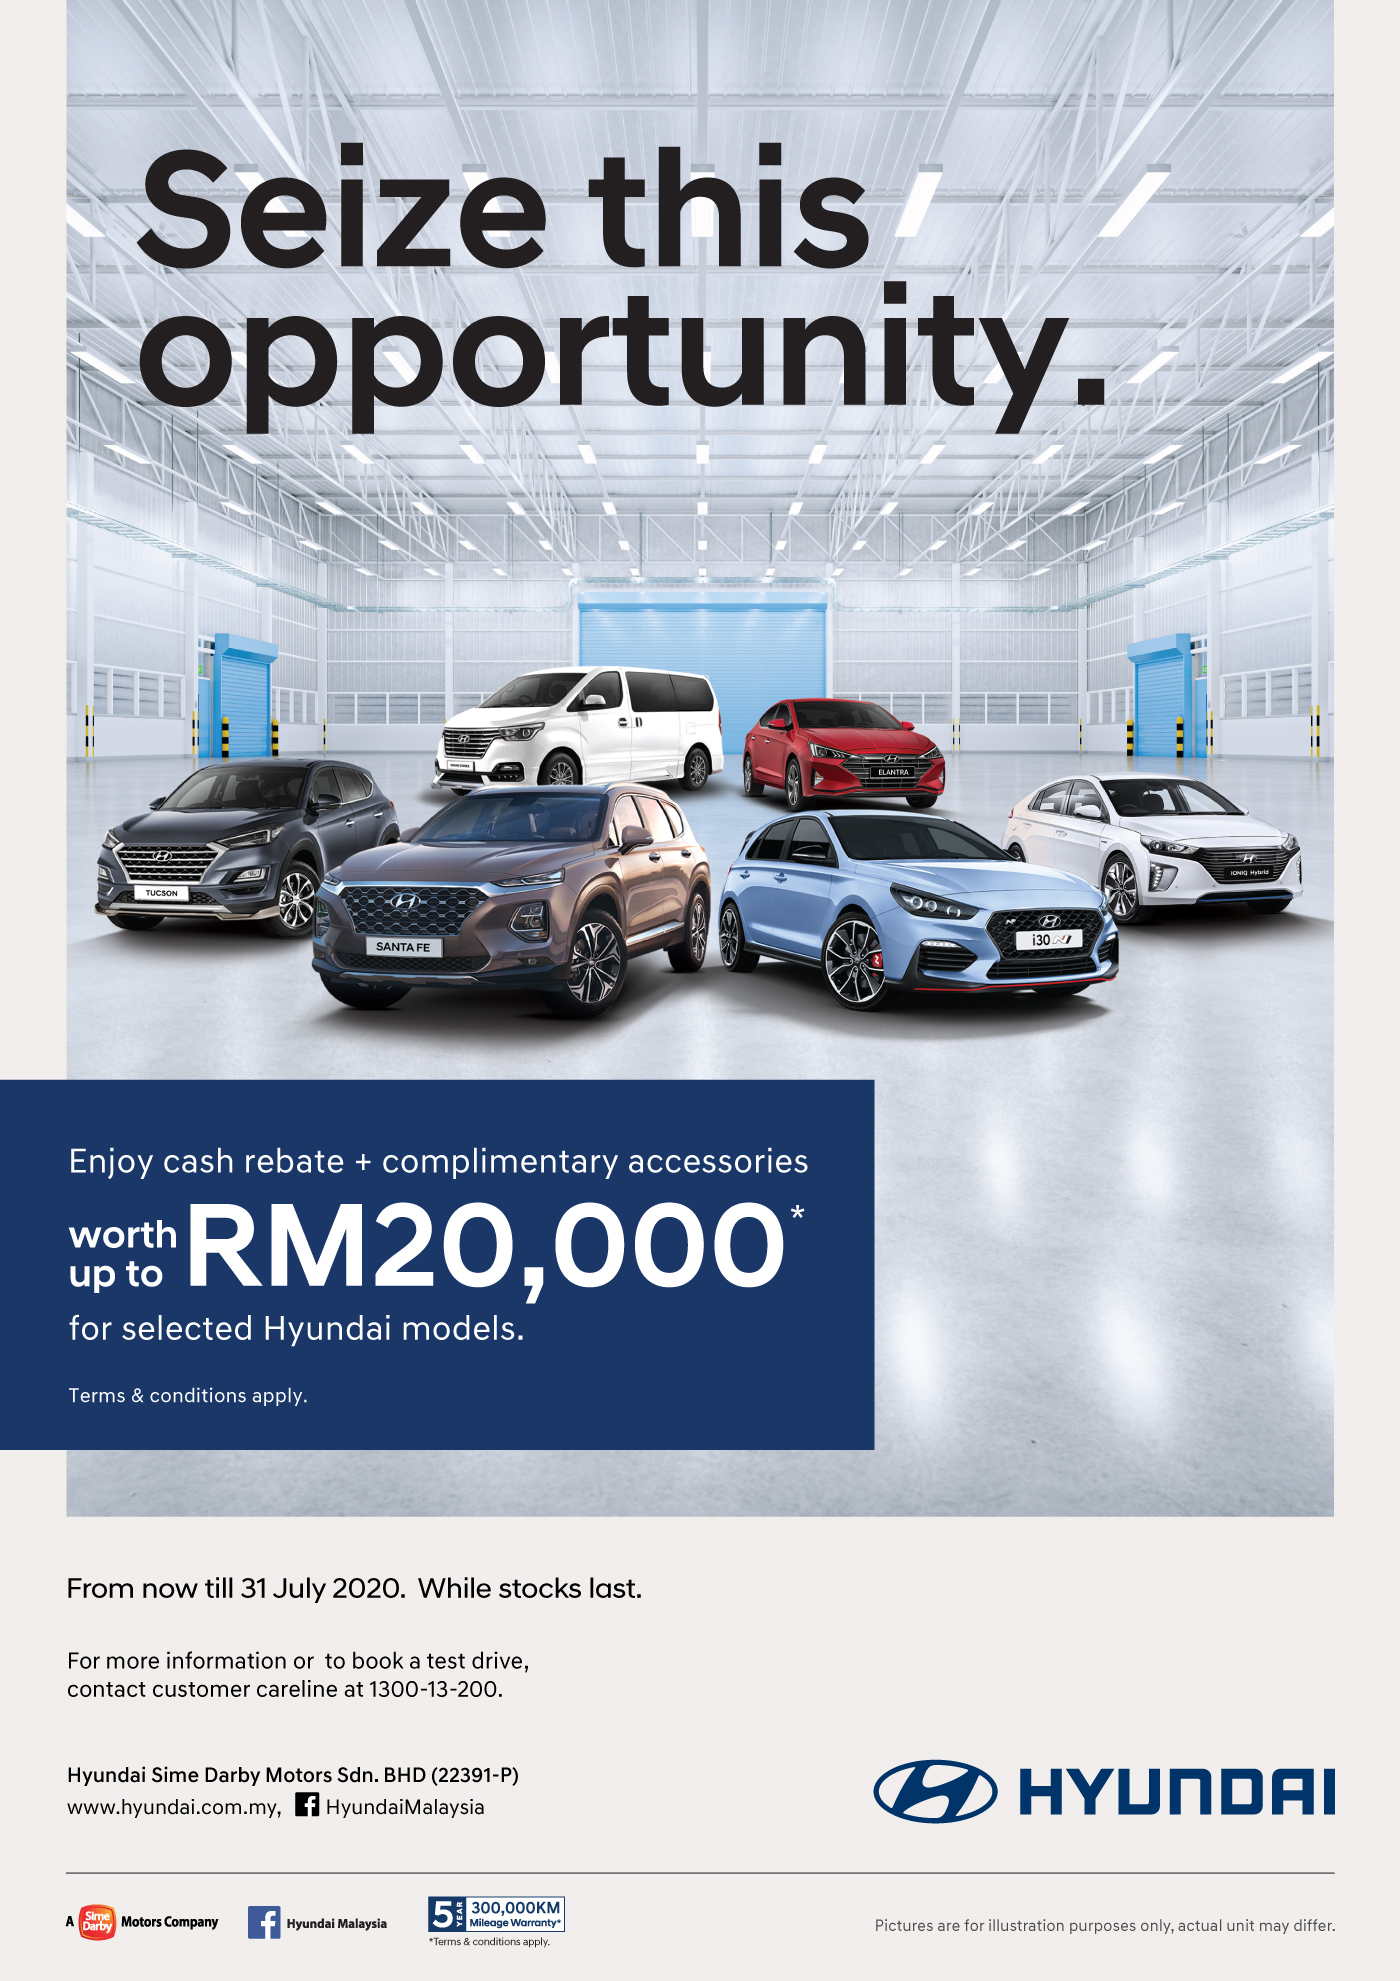 Seize this opportunity - Save up to RM20,000* for all Hyundai models.* Inclusive of sales tax savings. Terms apply. From now till 30 September 2020. While stock last.